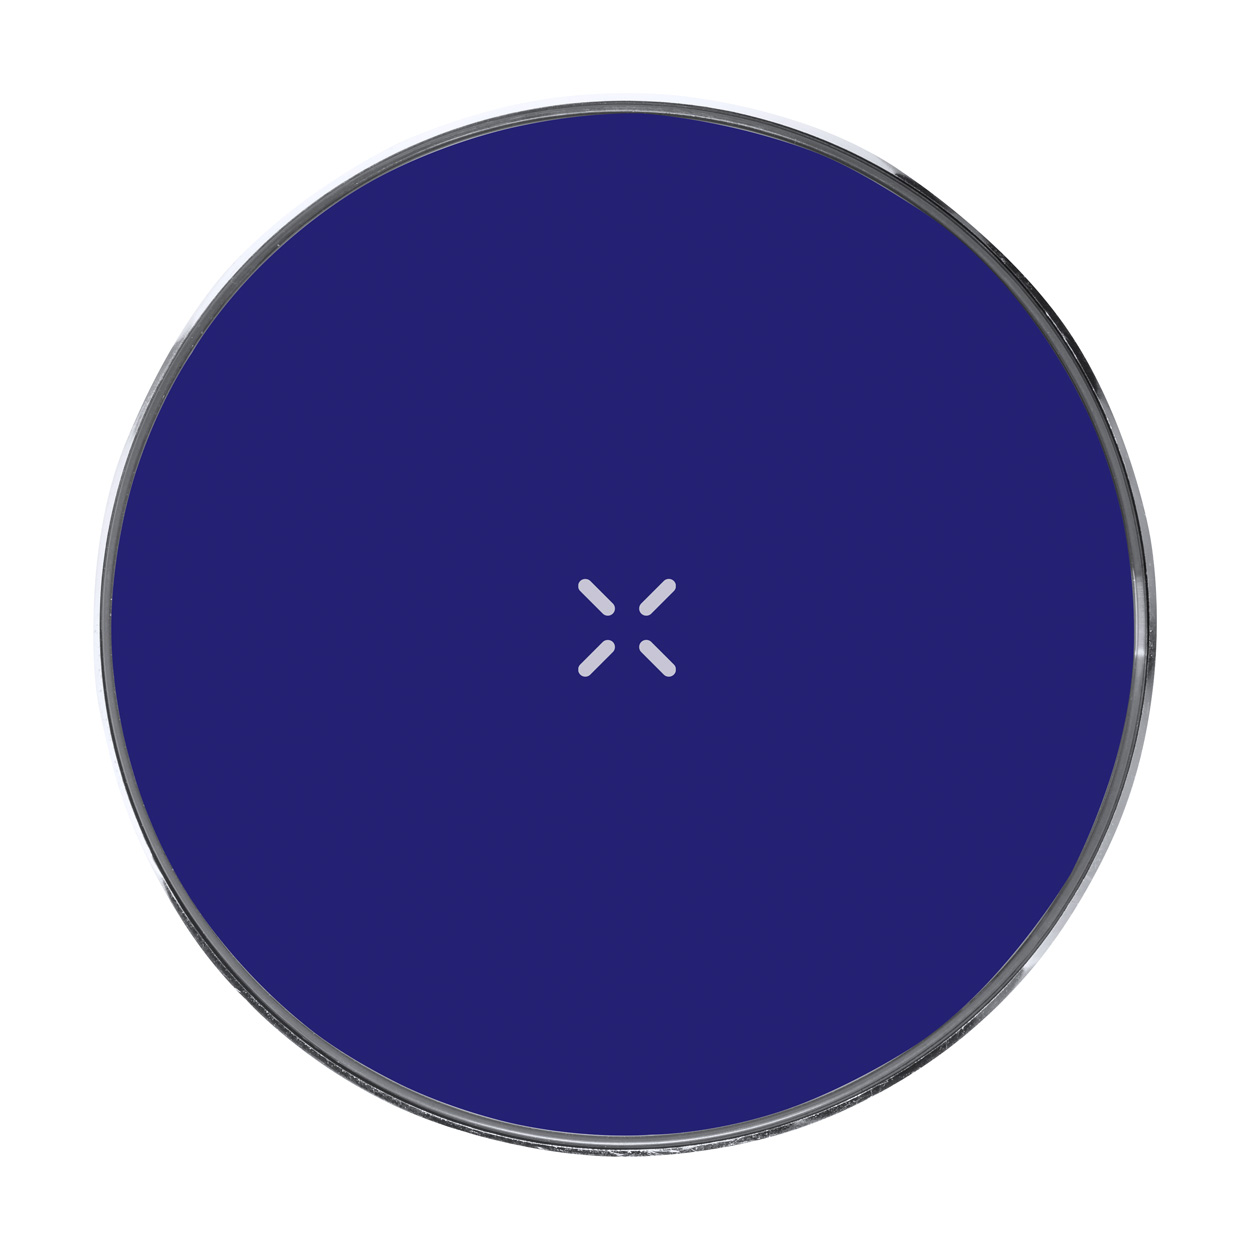 Golop wireless charger - blue